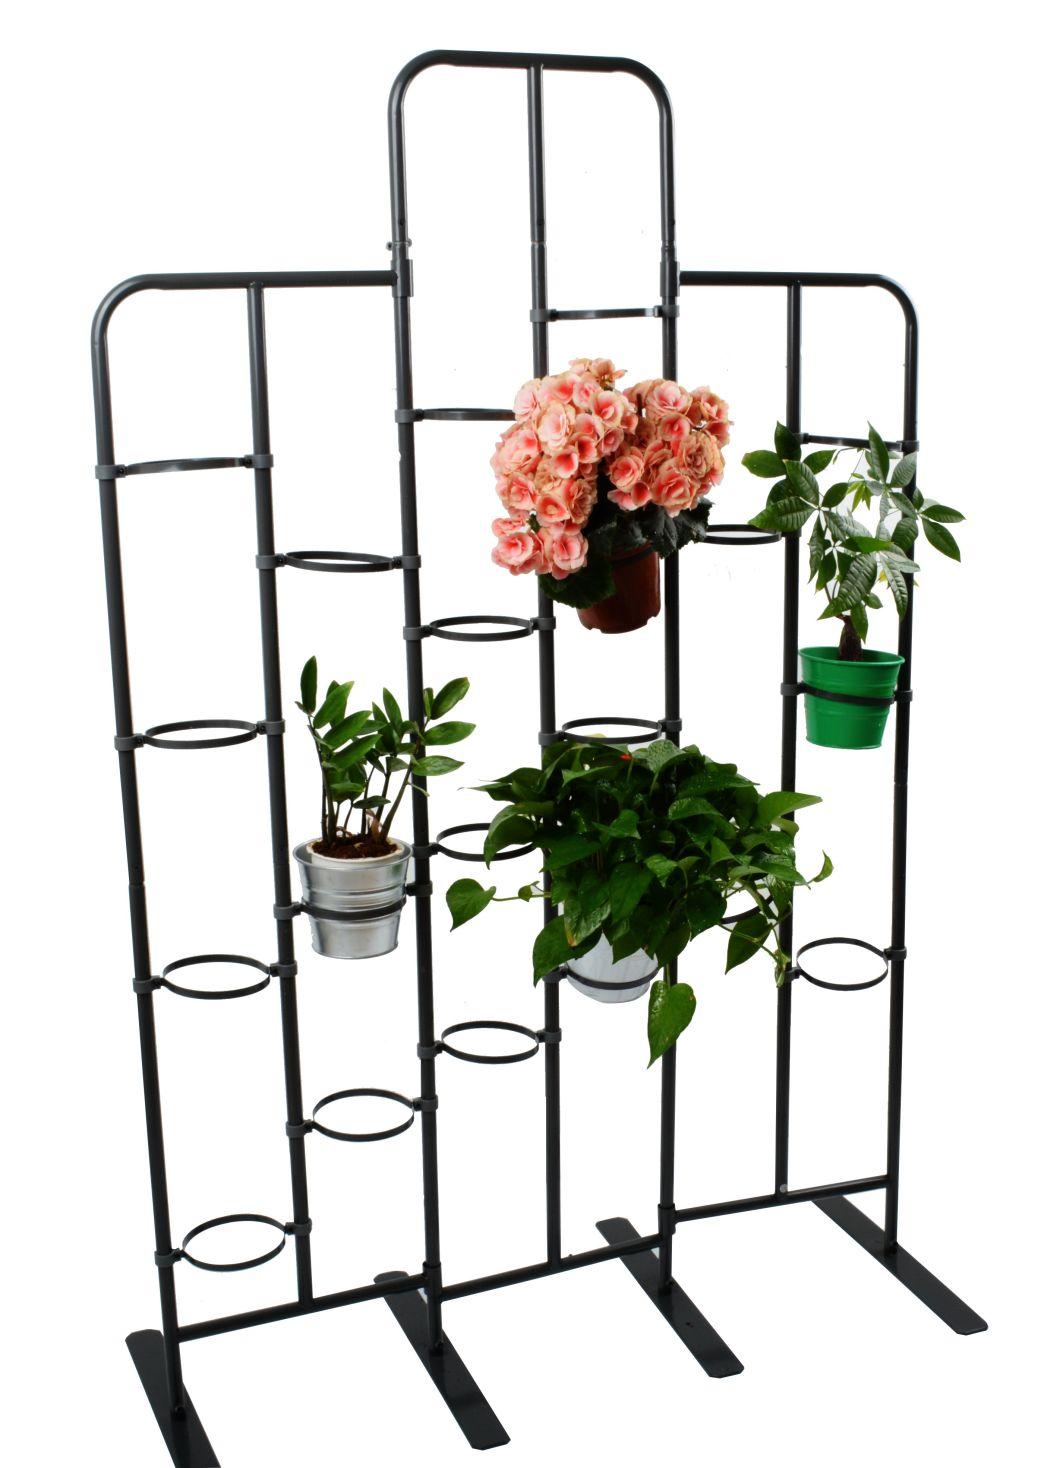 Metal Remove and Install Adjustable Flower Rack for Garden Plant Stand